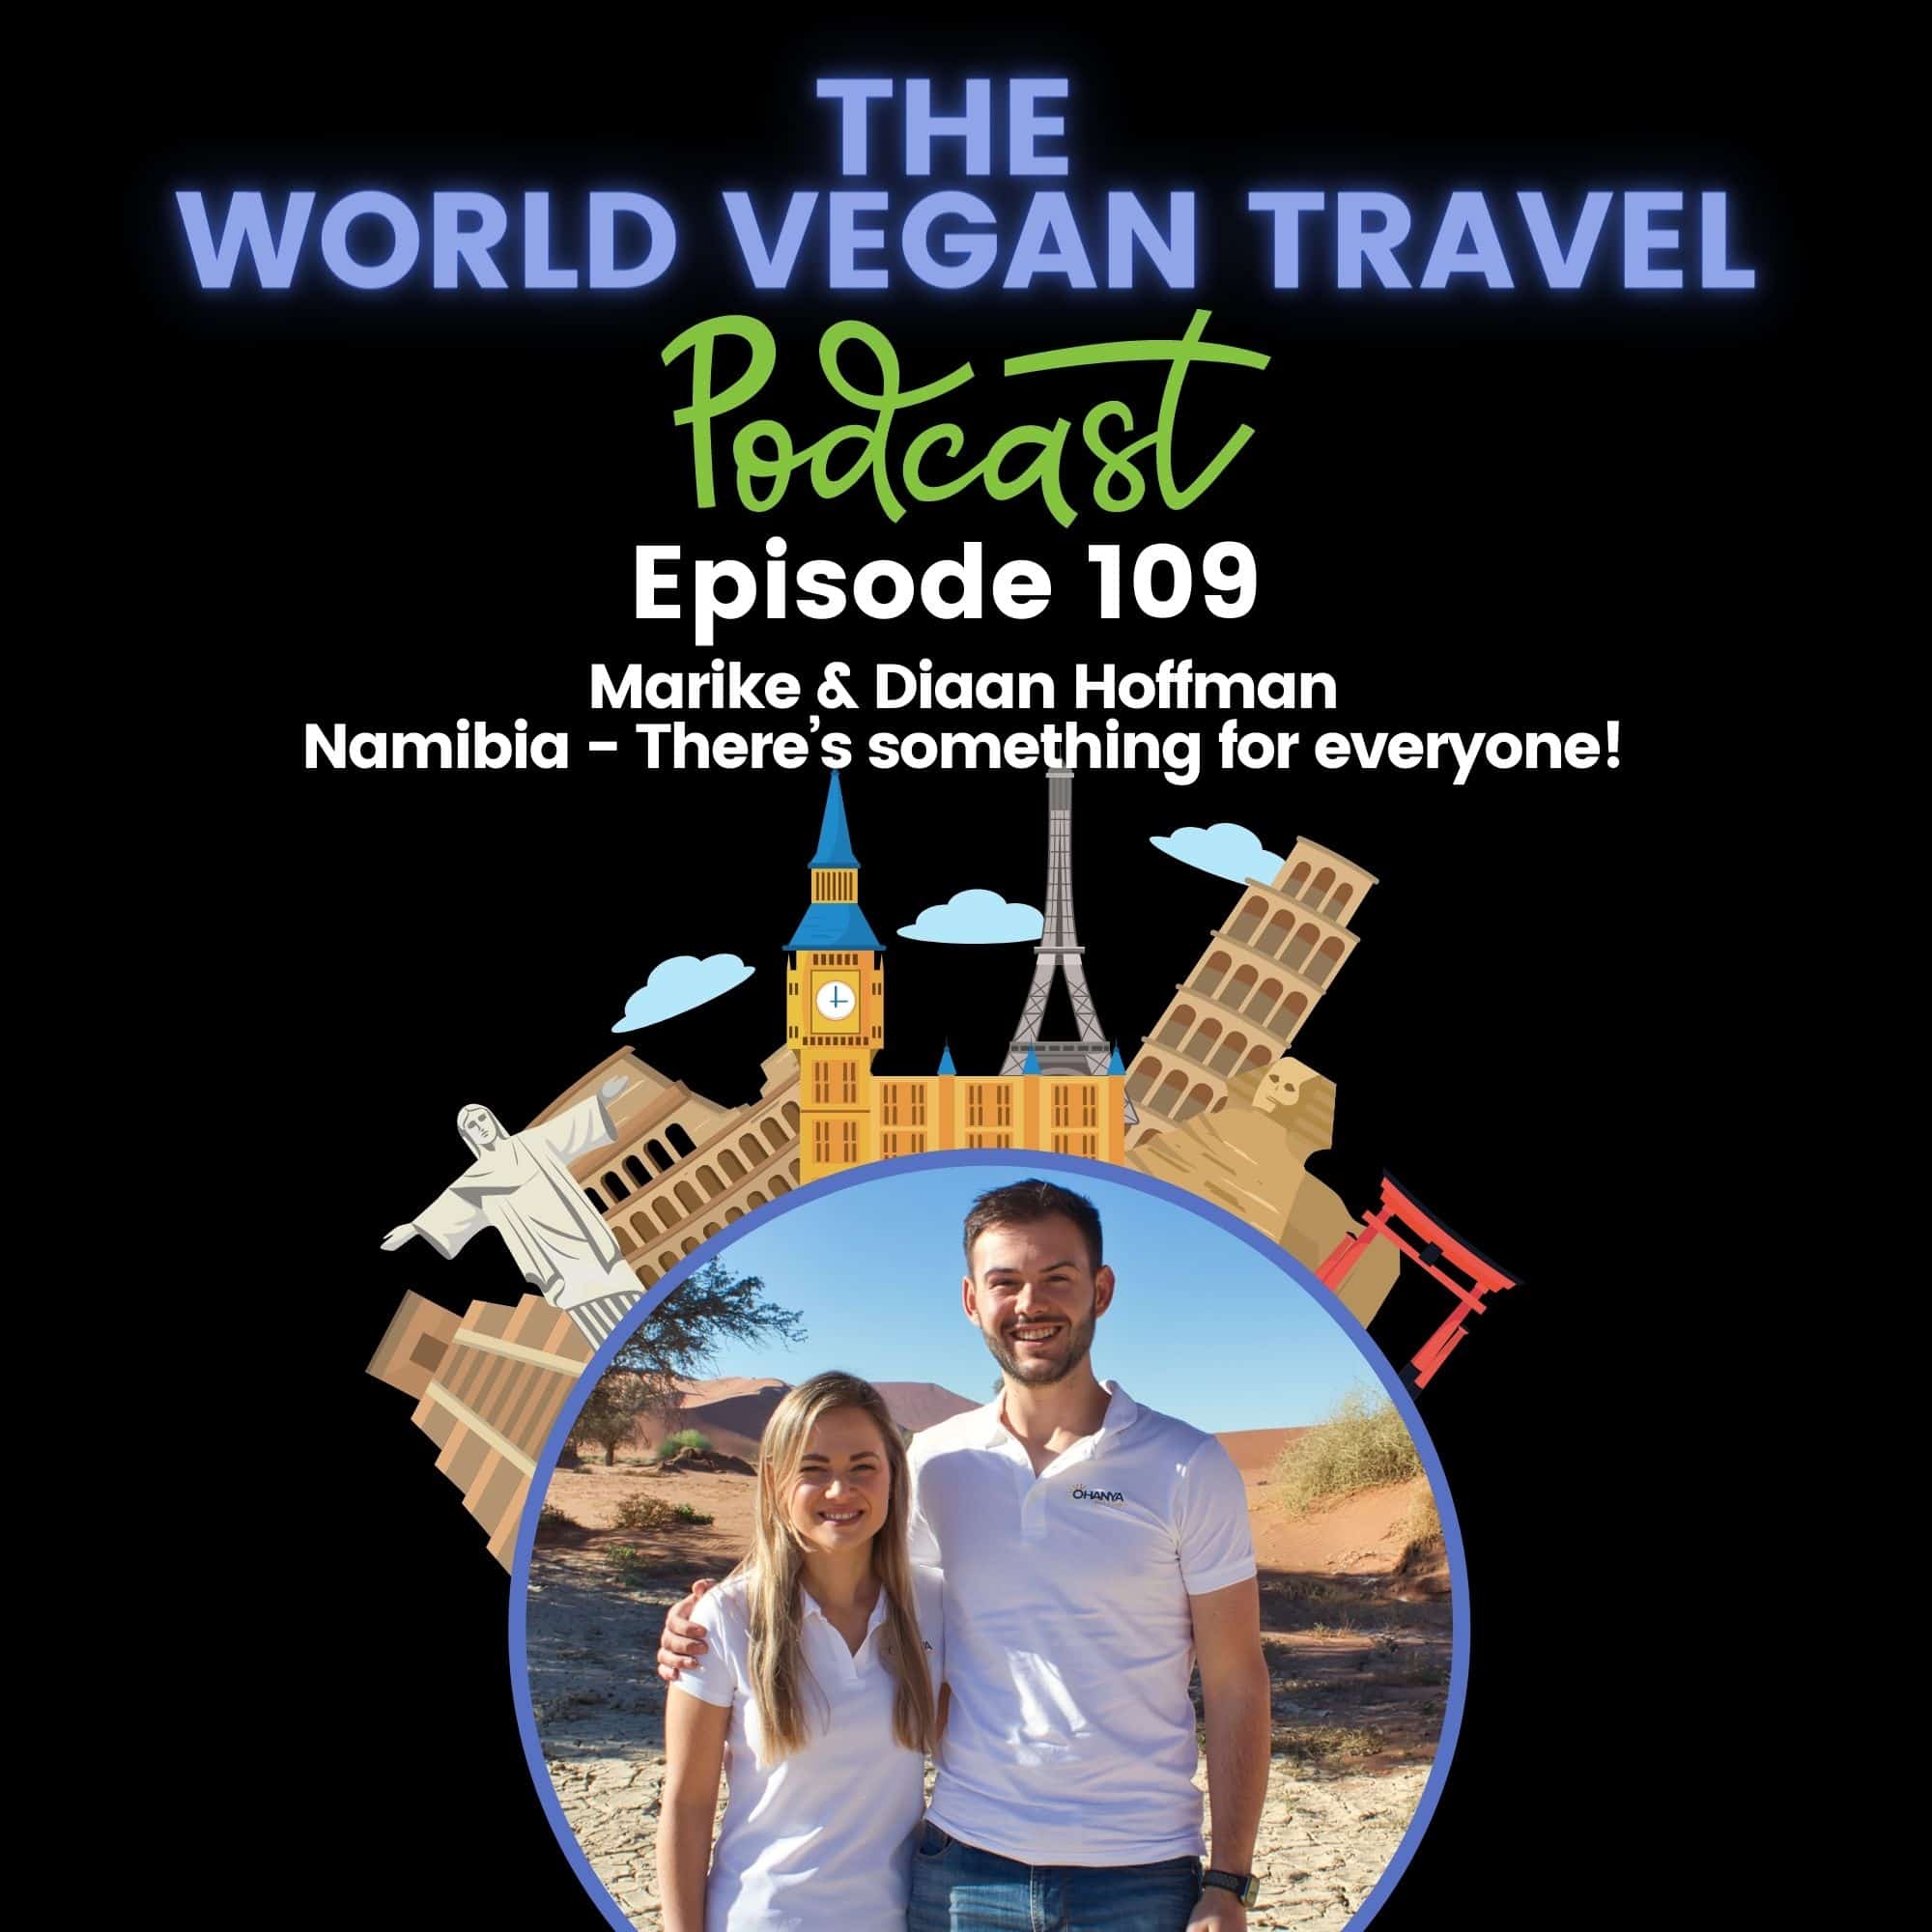 A man and woman are standing together wearing white shirts in bright sun having smile on their face; Namibia - There’s something for everyone! Marike & Diaan Hoffman Ep 109